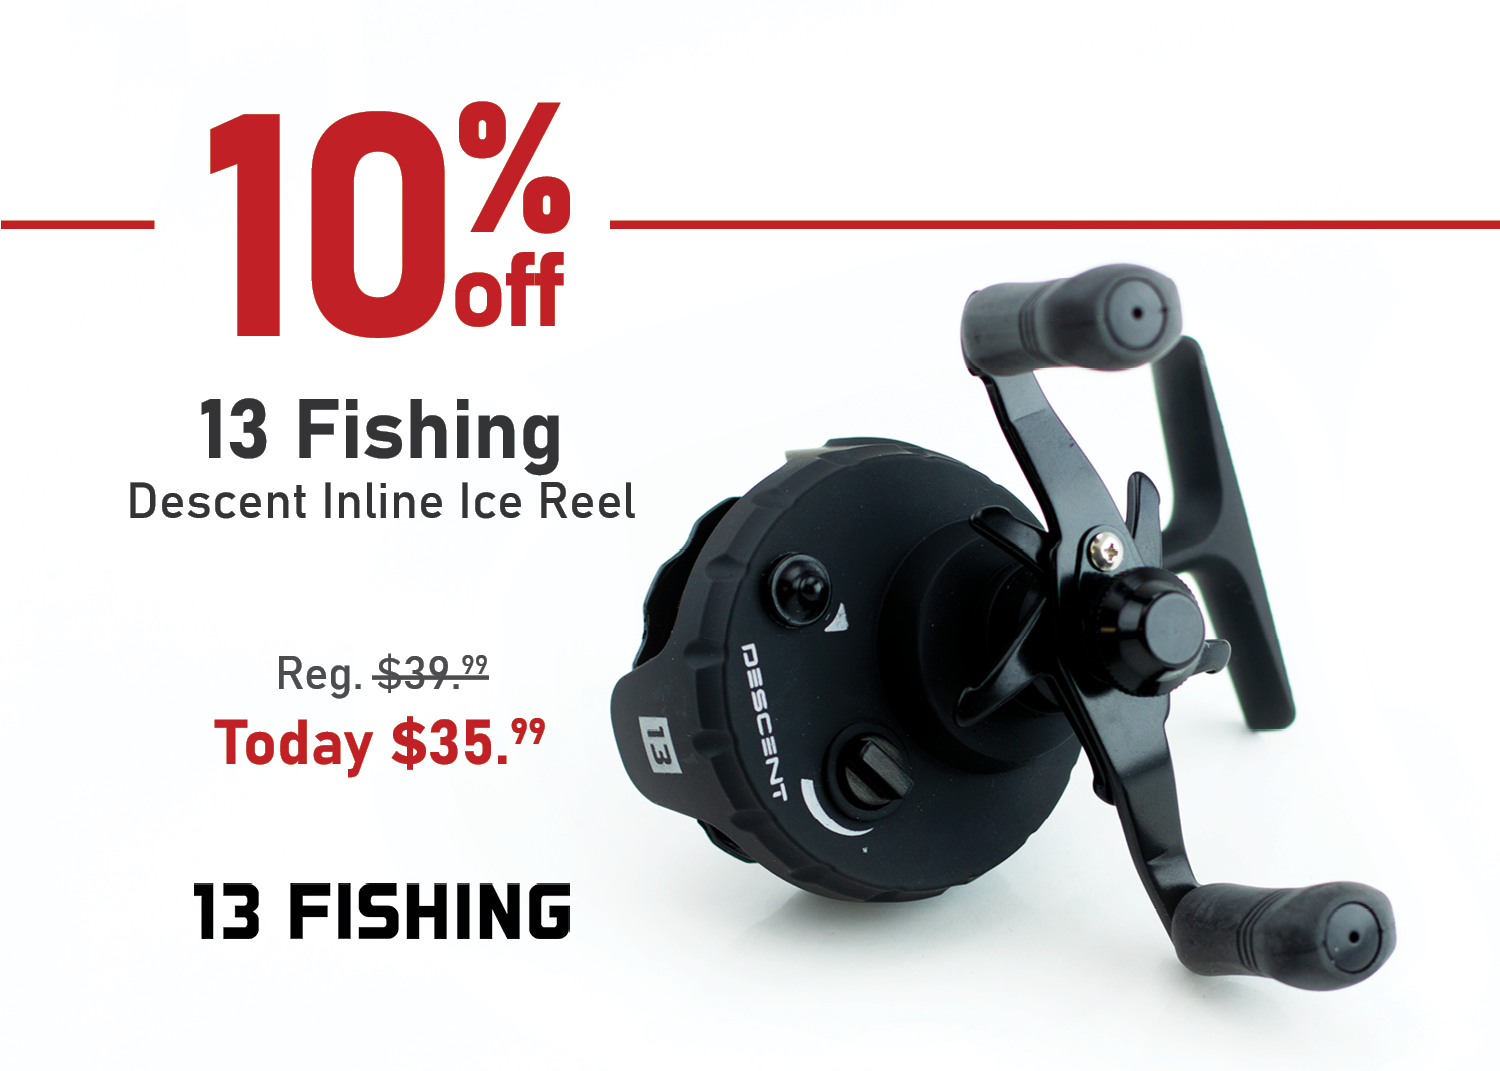 Save 10% on the 13 Fishing Descent Inline Ice Reel